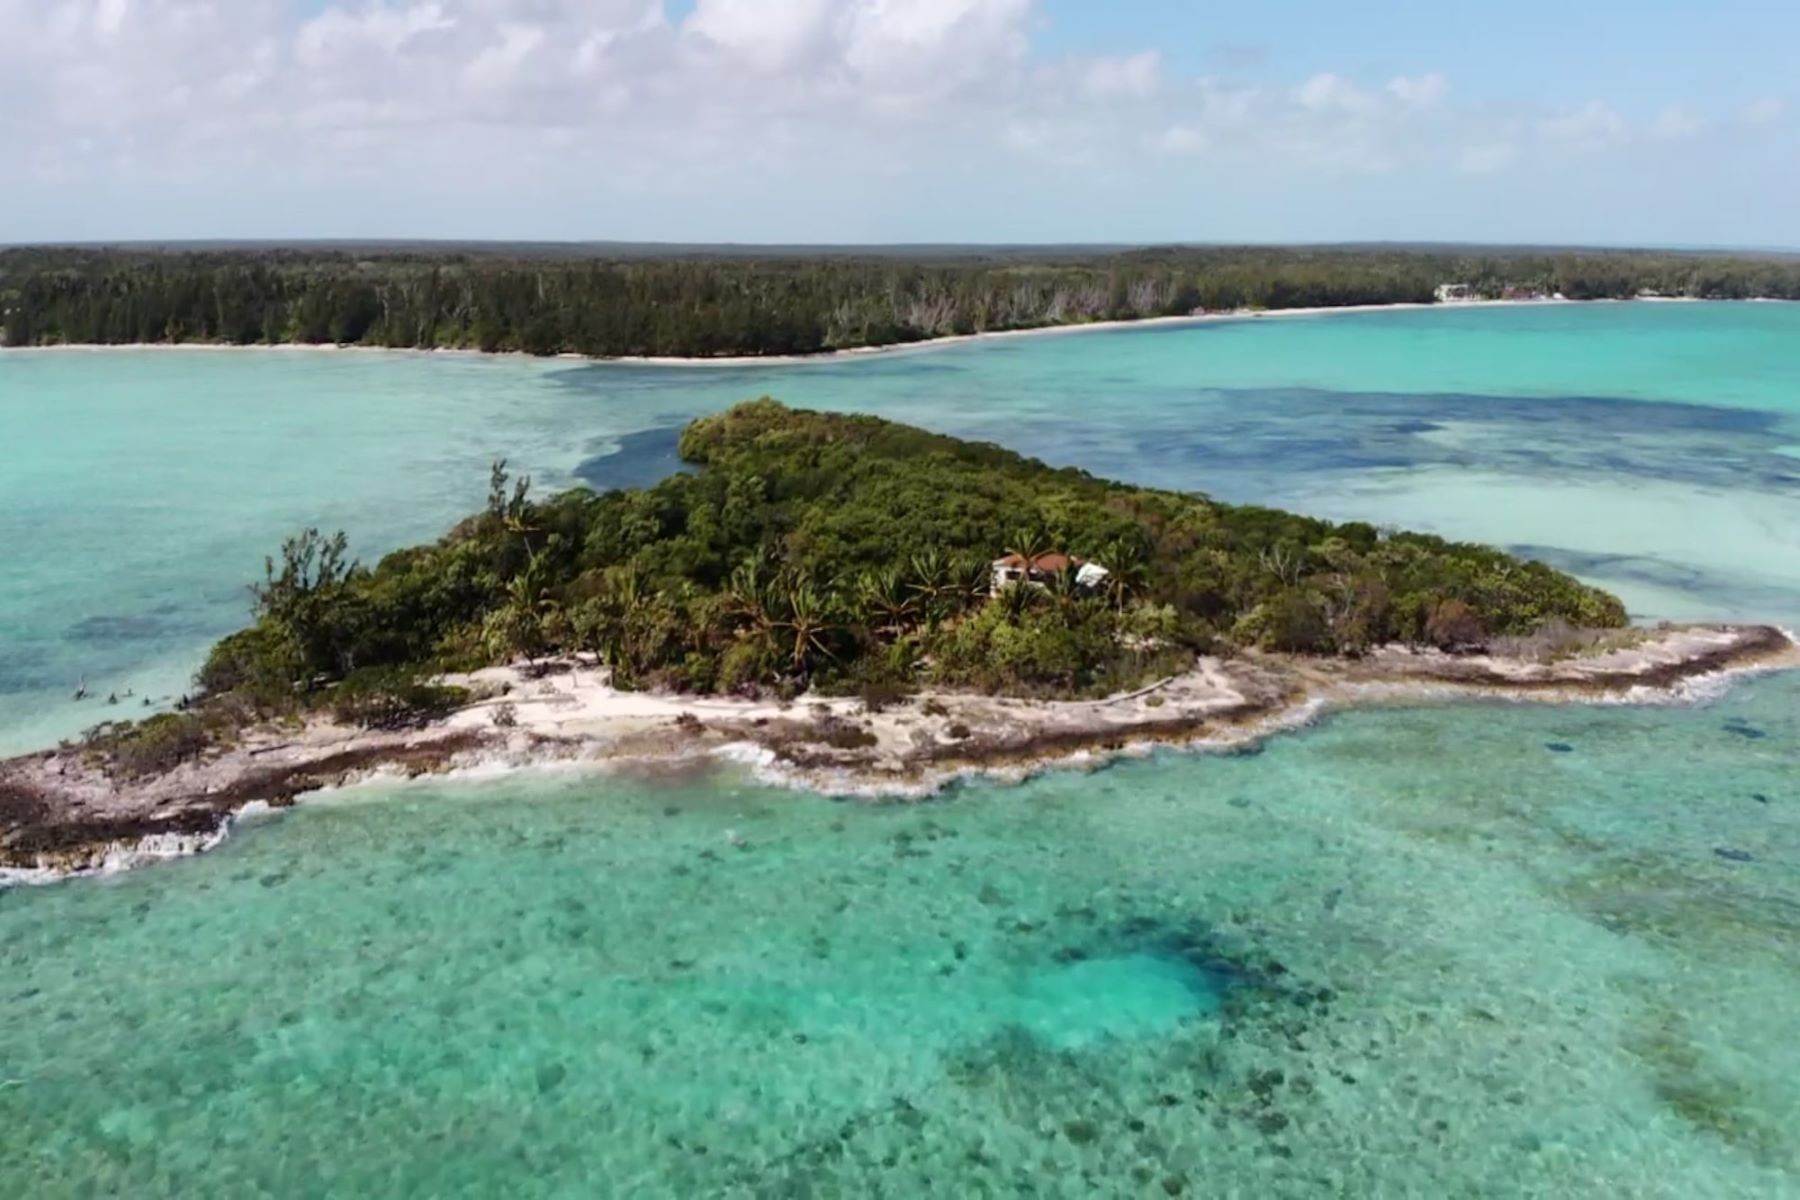 Private Islands for Sale at Swain's Cay, Private Island off Andros Mangrove Cay, Andros, Bahamas